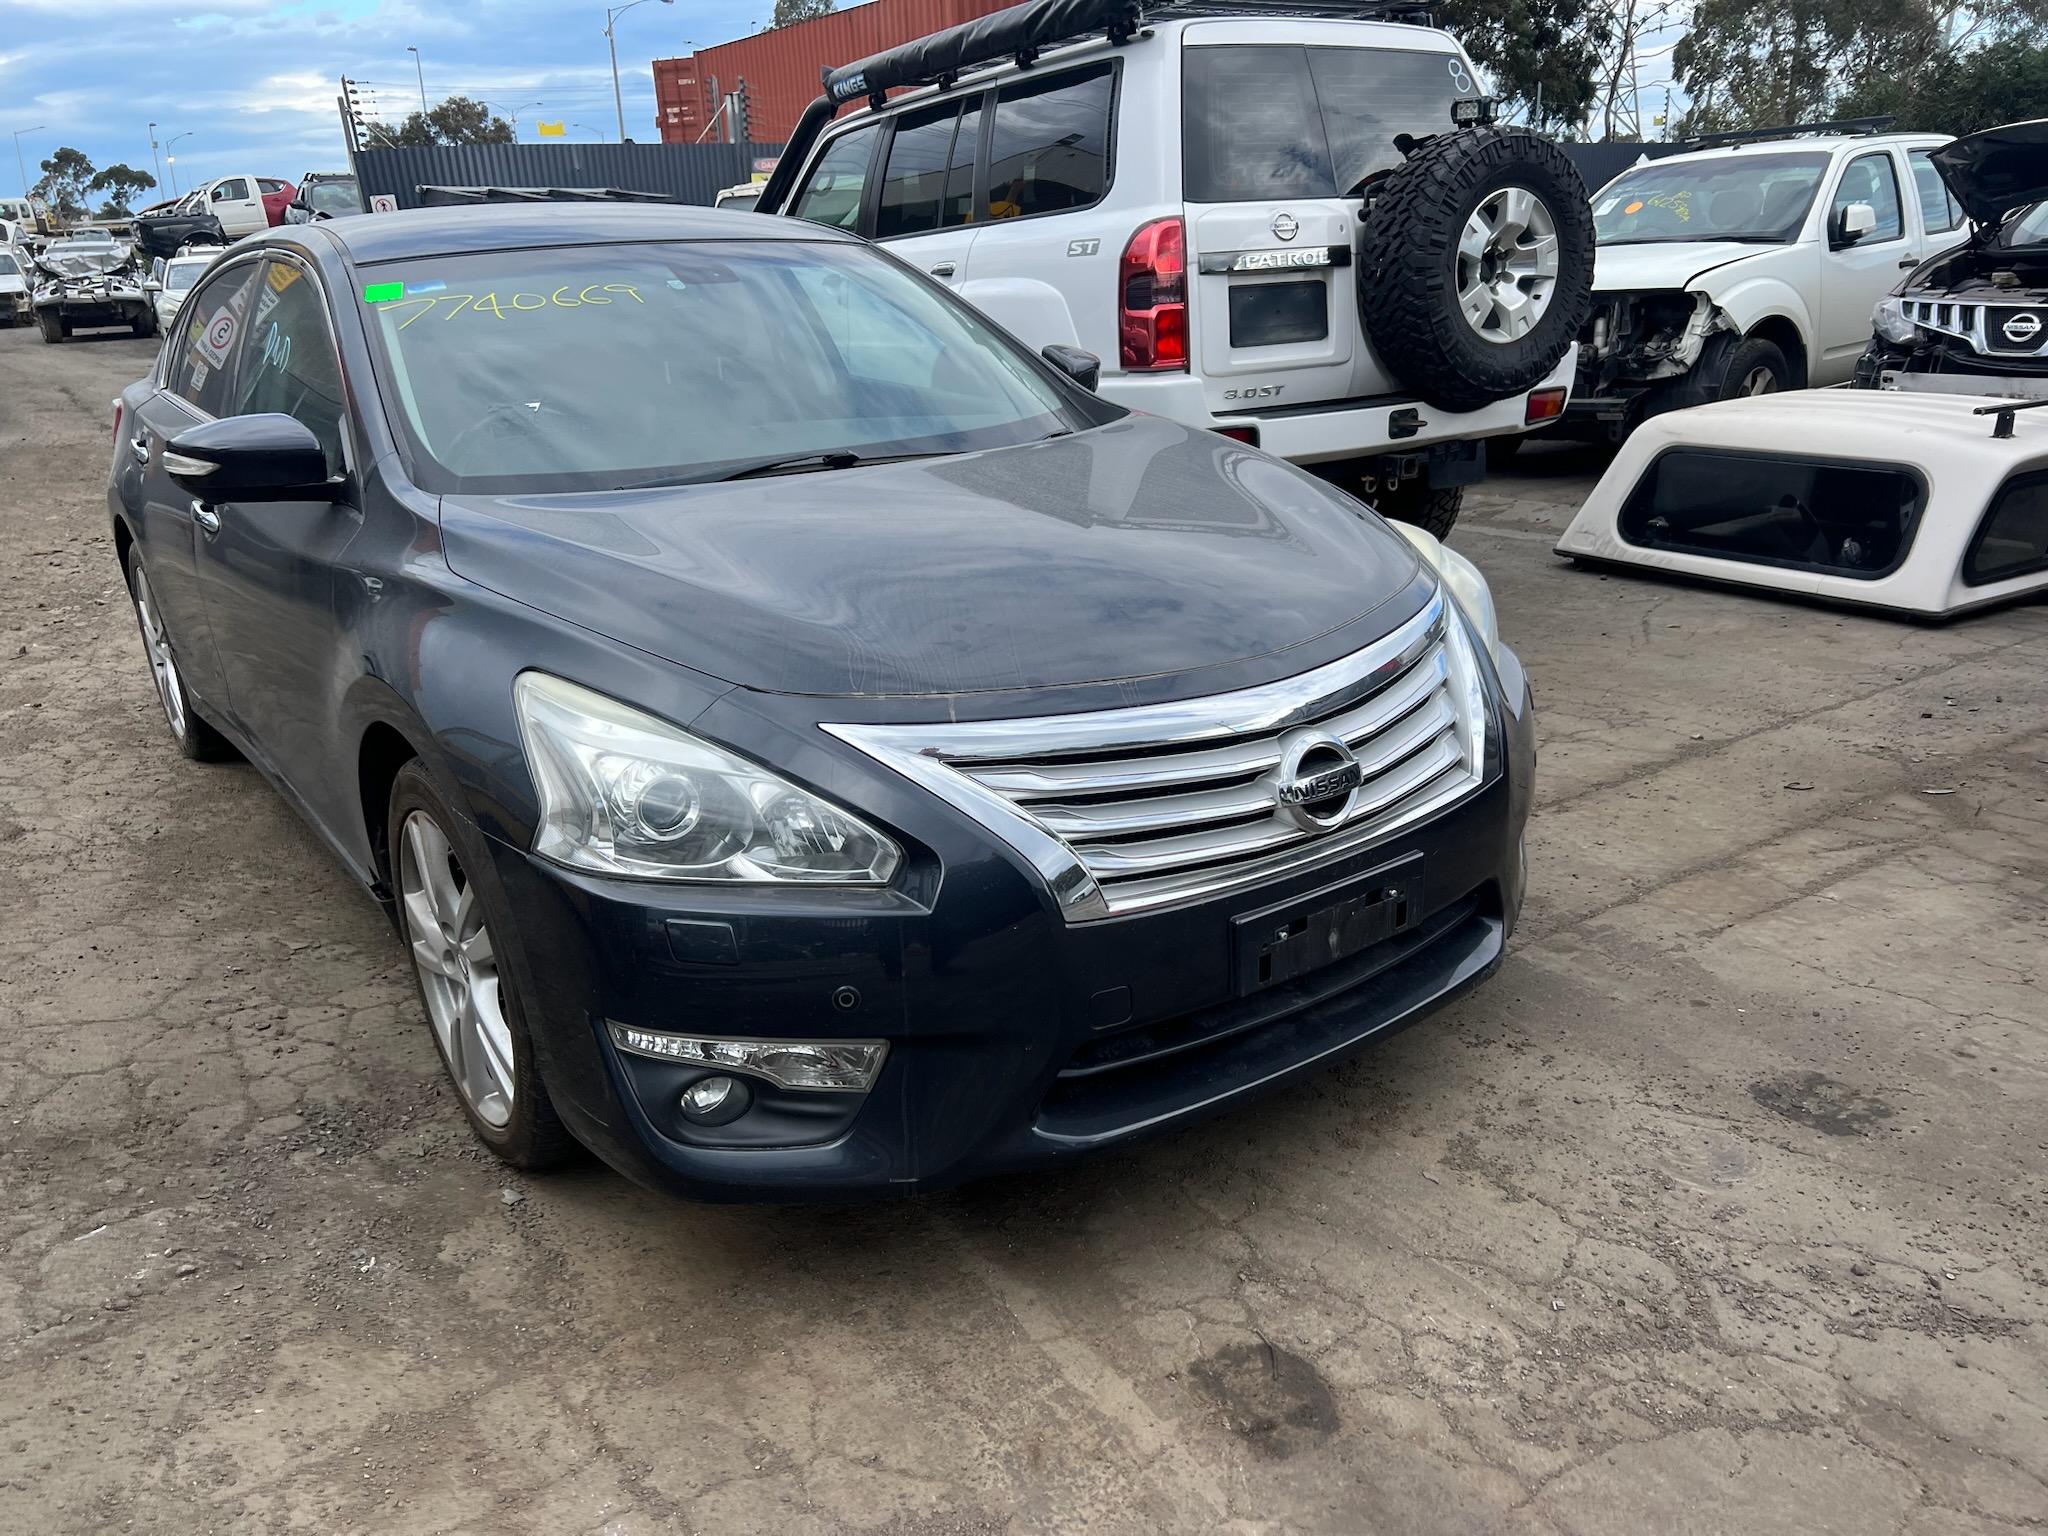 PARTING OUT NISSAN ALTMA L33 VQ35 CVT AUTOMATIC BLACK 2015 WRECKING / PARTS FOR SALE